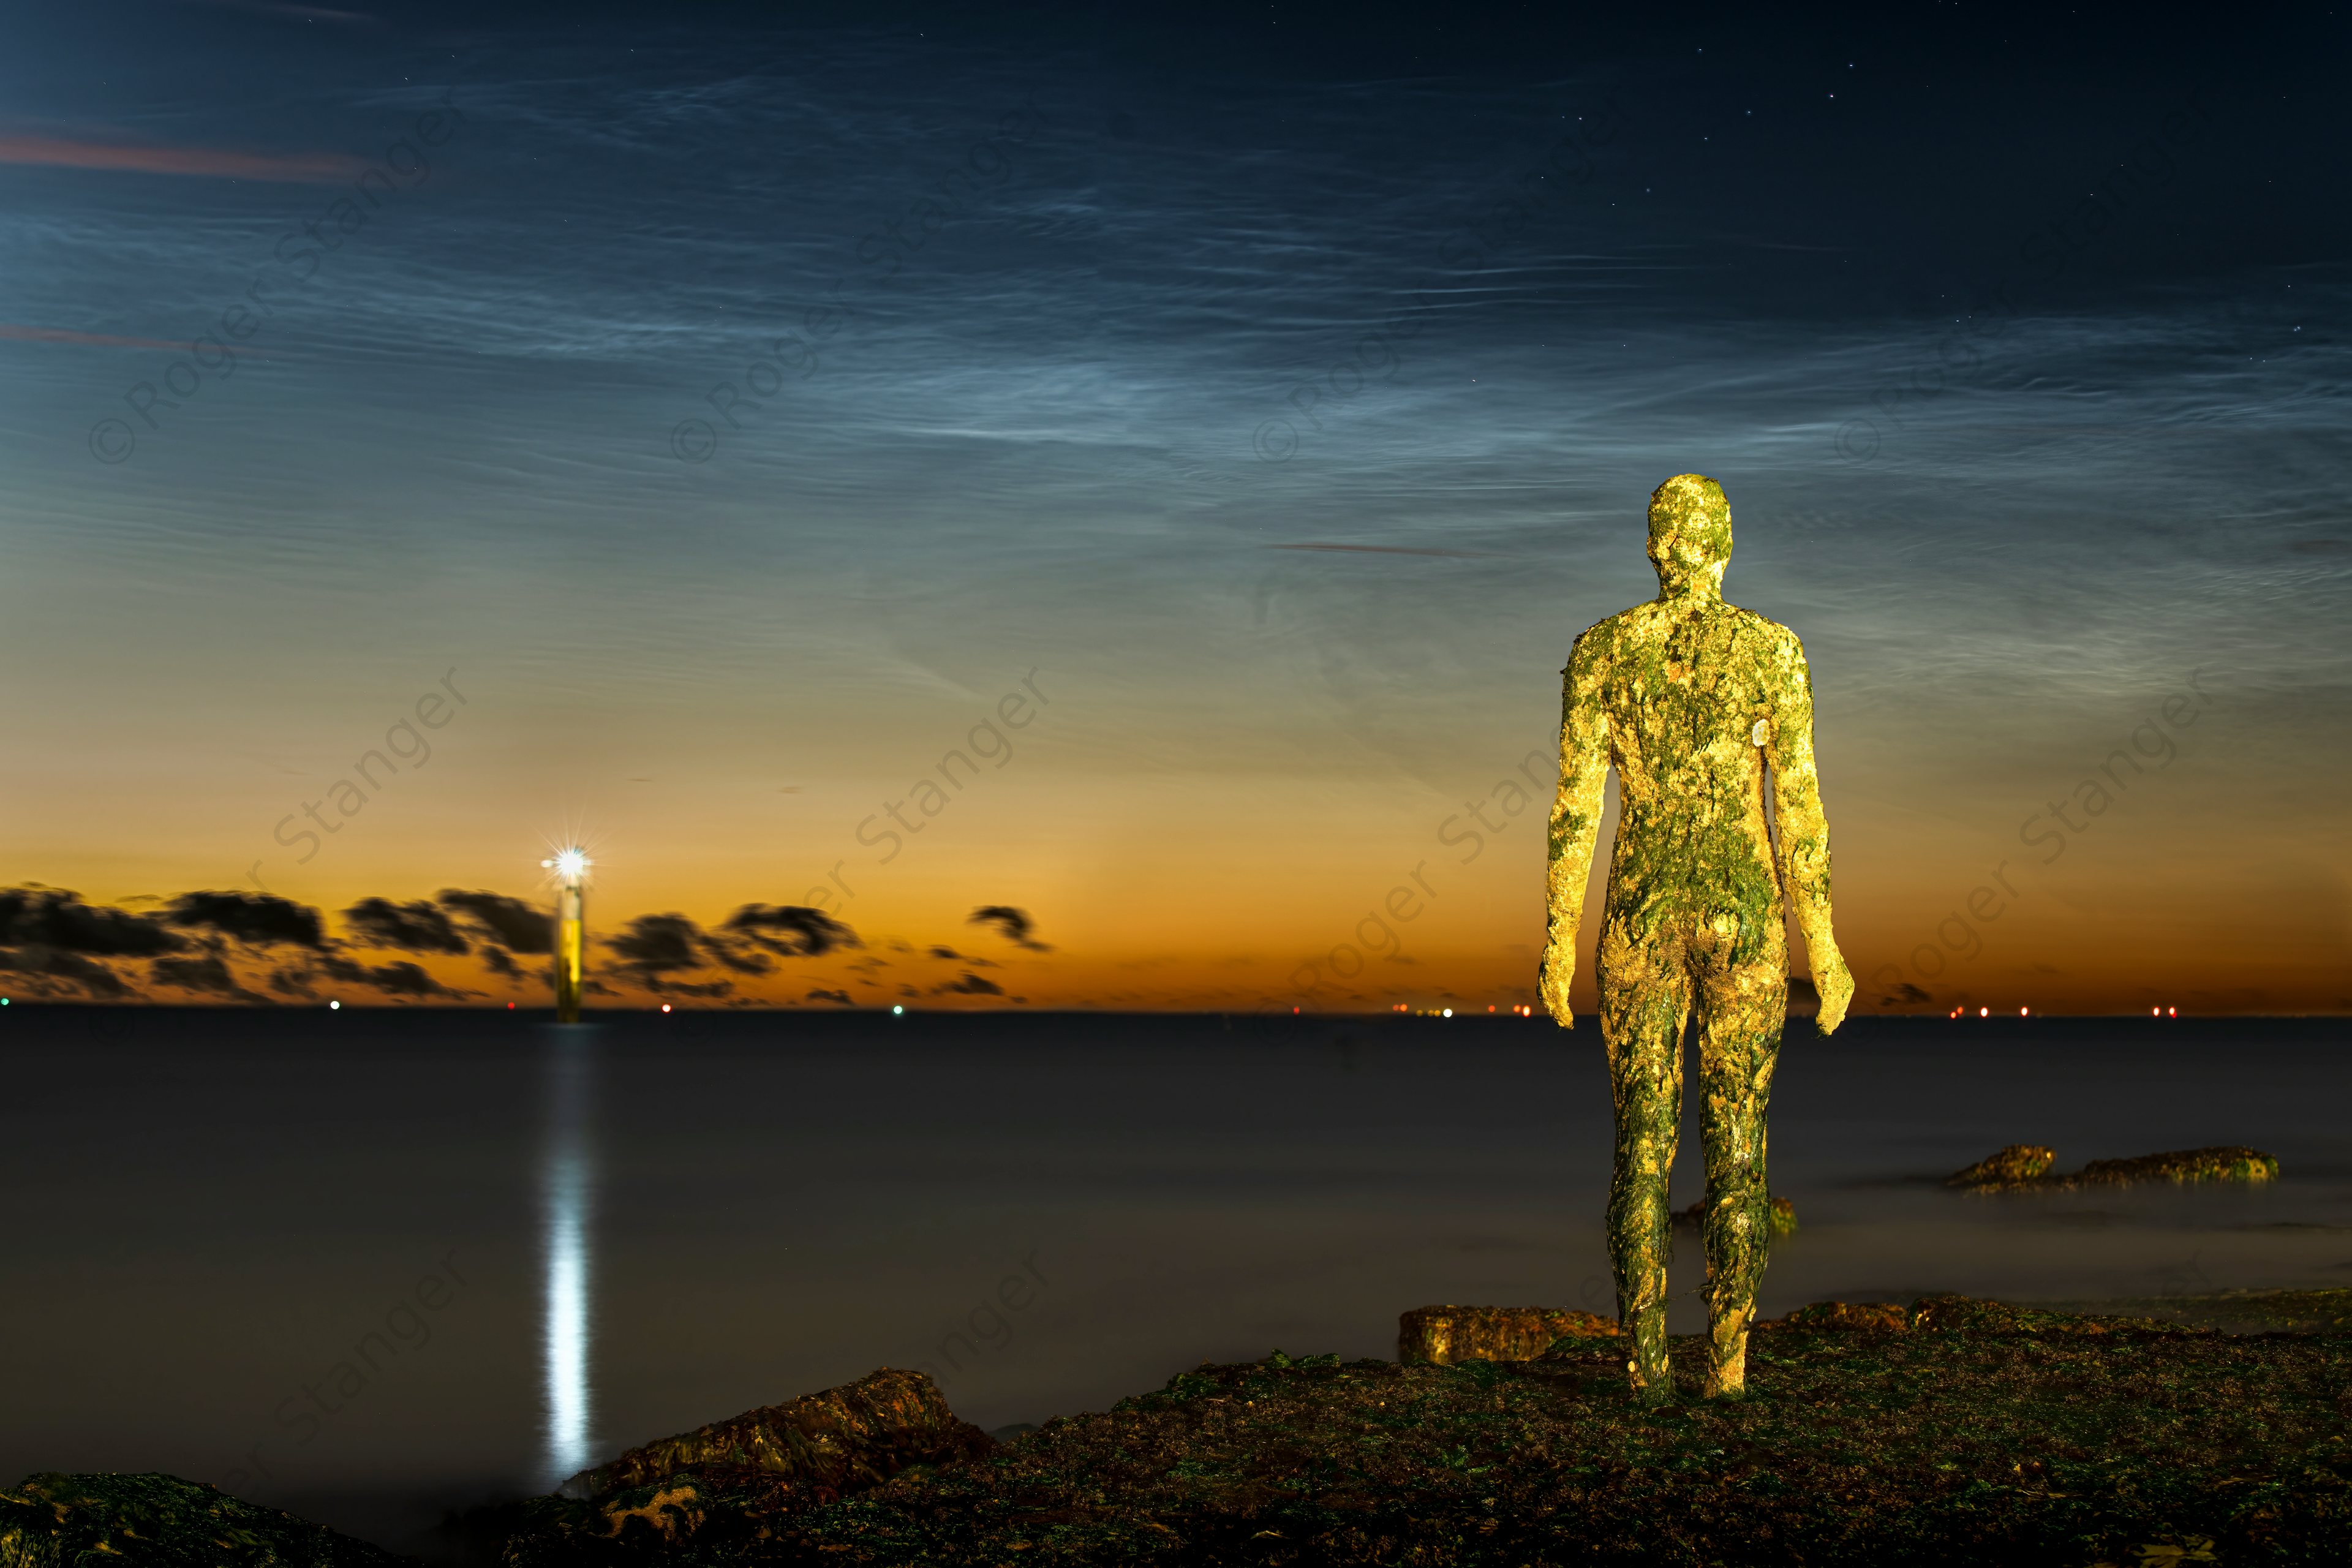 Margate Noctilucent Clouds And Gormley Statue 'Another Time'